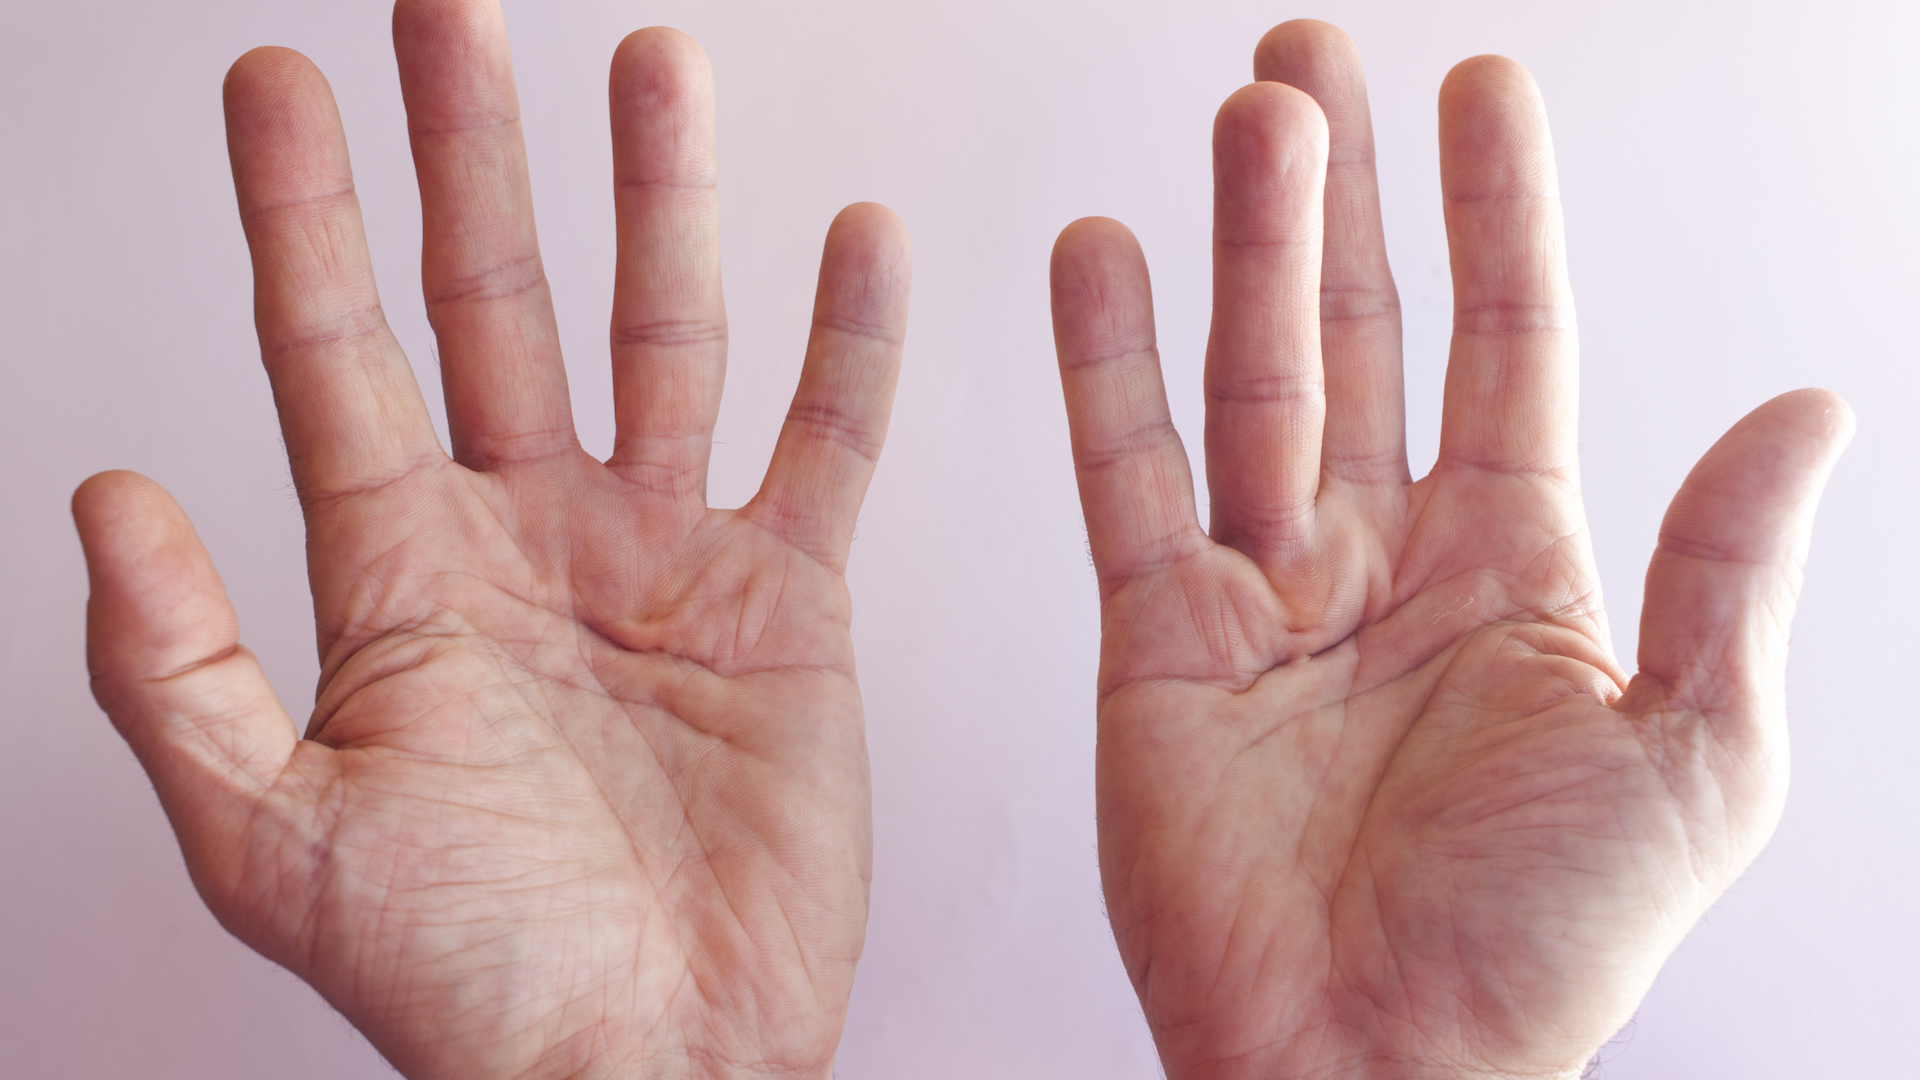 A photograph of a man's hands. The ring finger on the right hand is permanently contracted inwards.